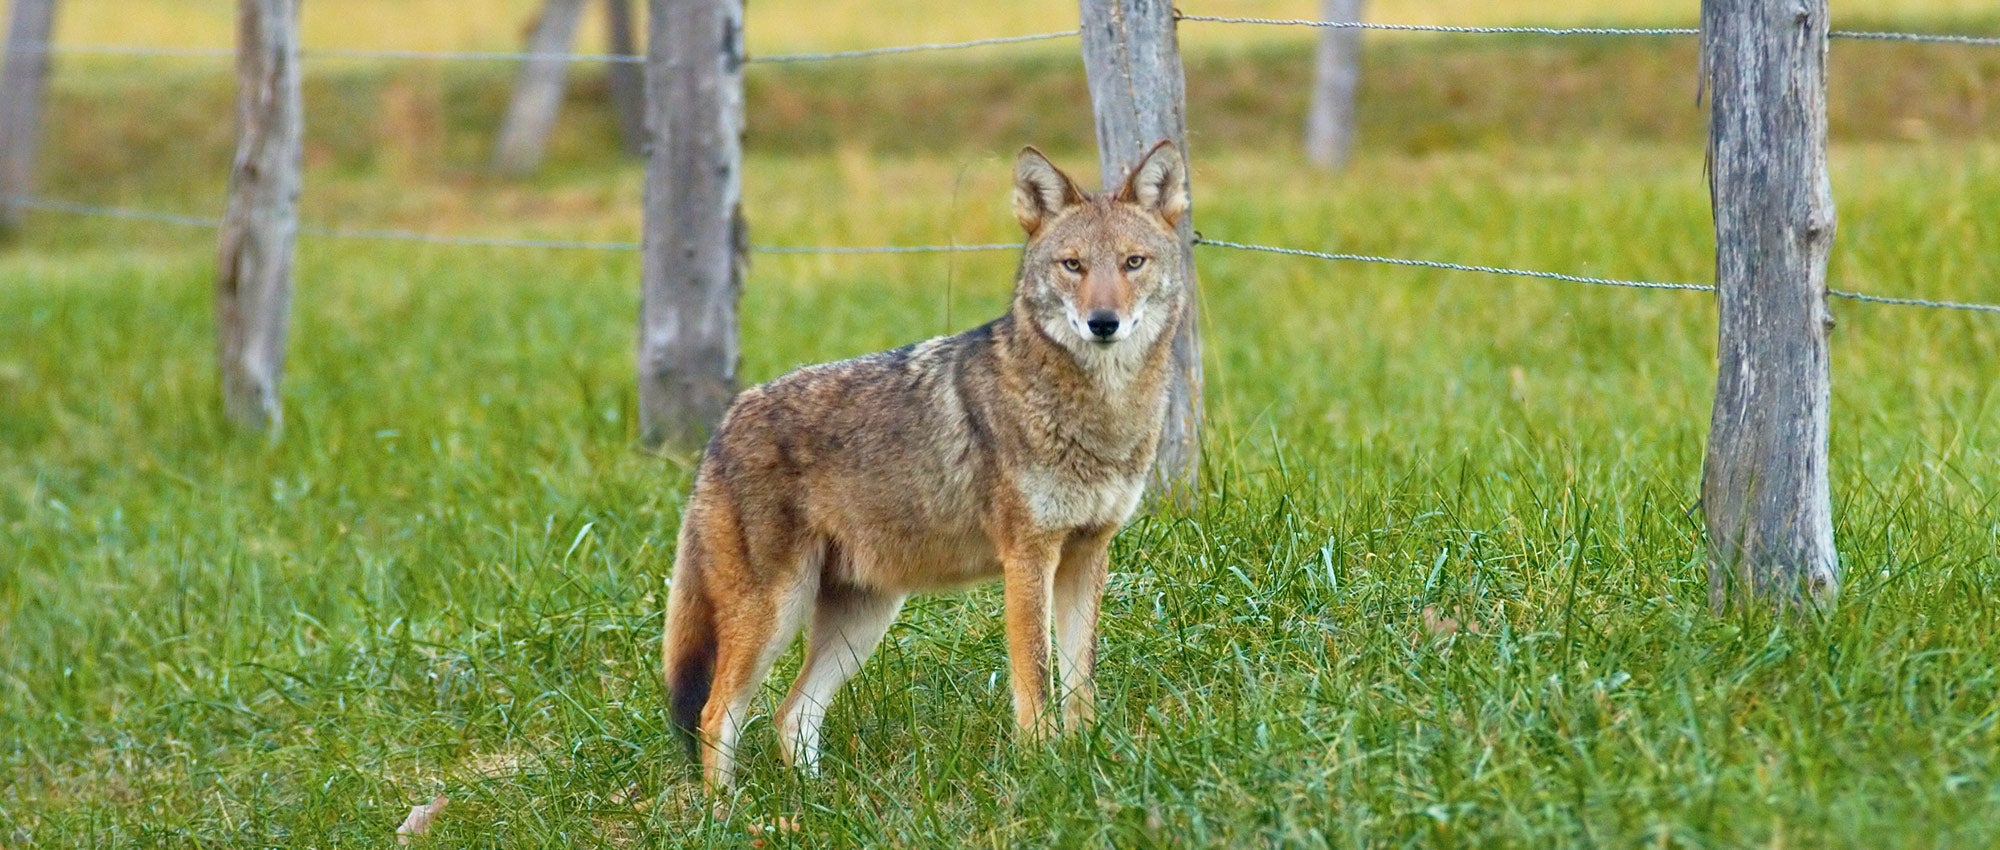 What to know if you see or encounter a coyote | The Humane Society of the  United States